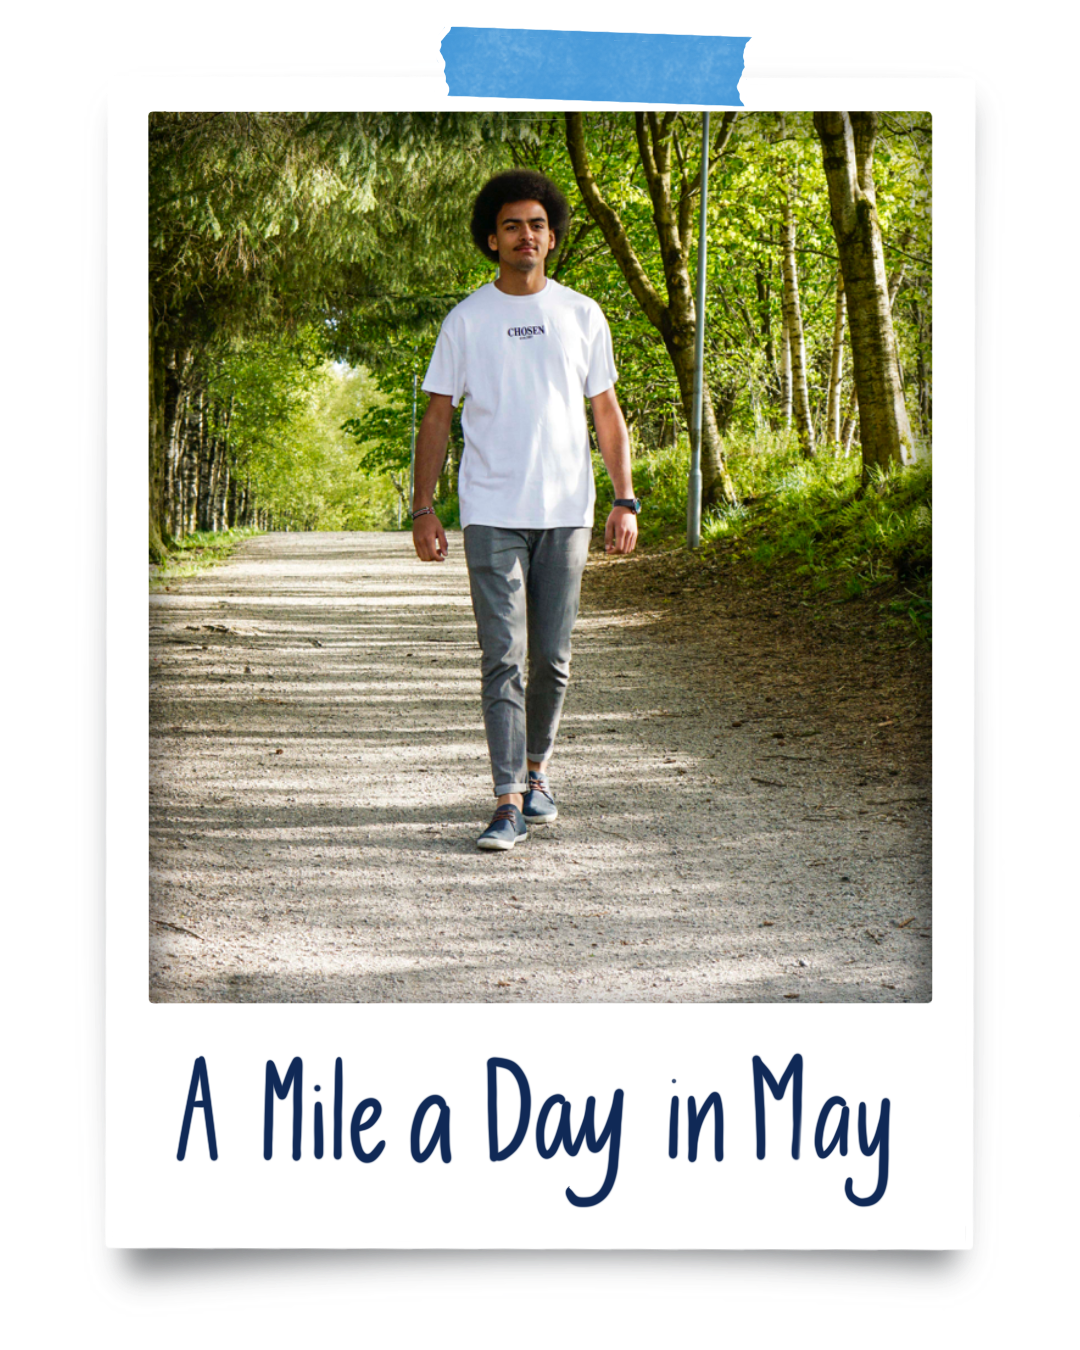 Man walking "A Mile a Day in May"